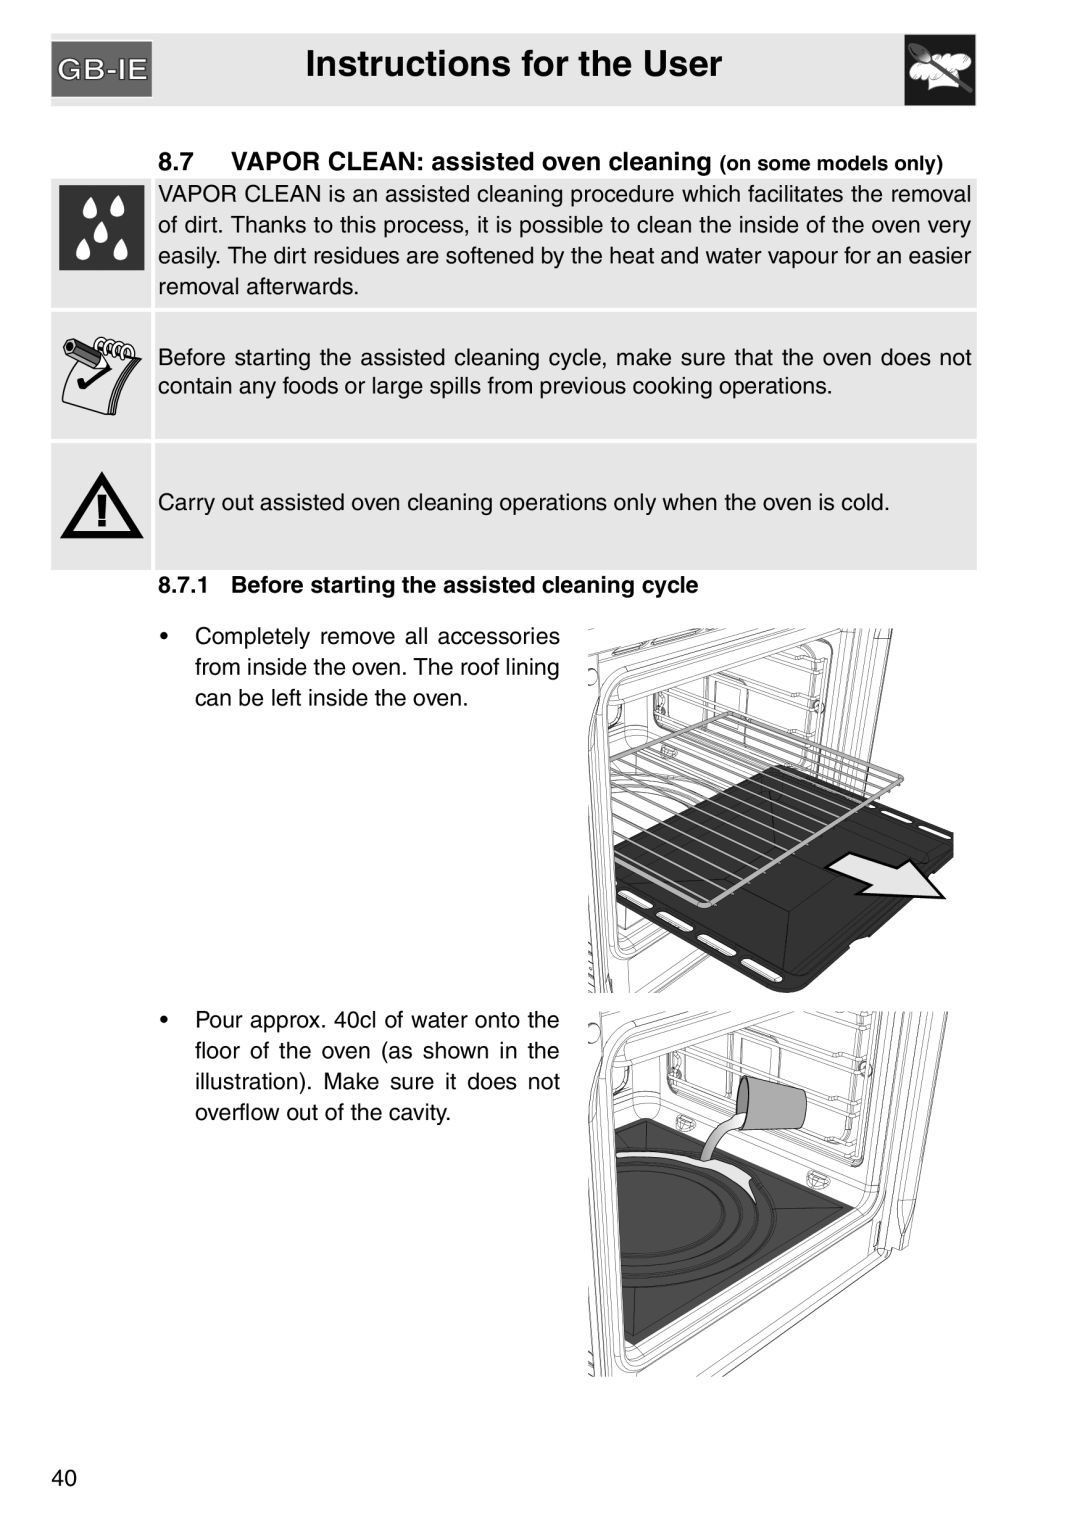 Smeg SA561X-9 installation instructions VAPOR CLEAN assisted oven cleaning on some models only, Instructions for the User 